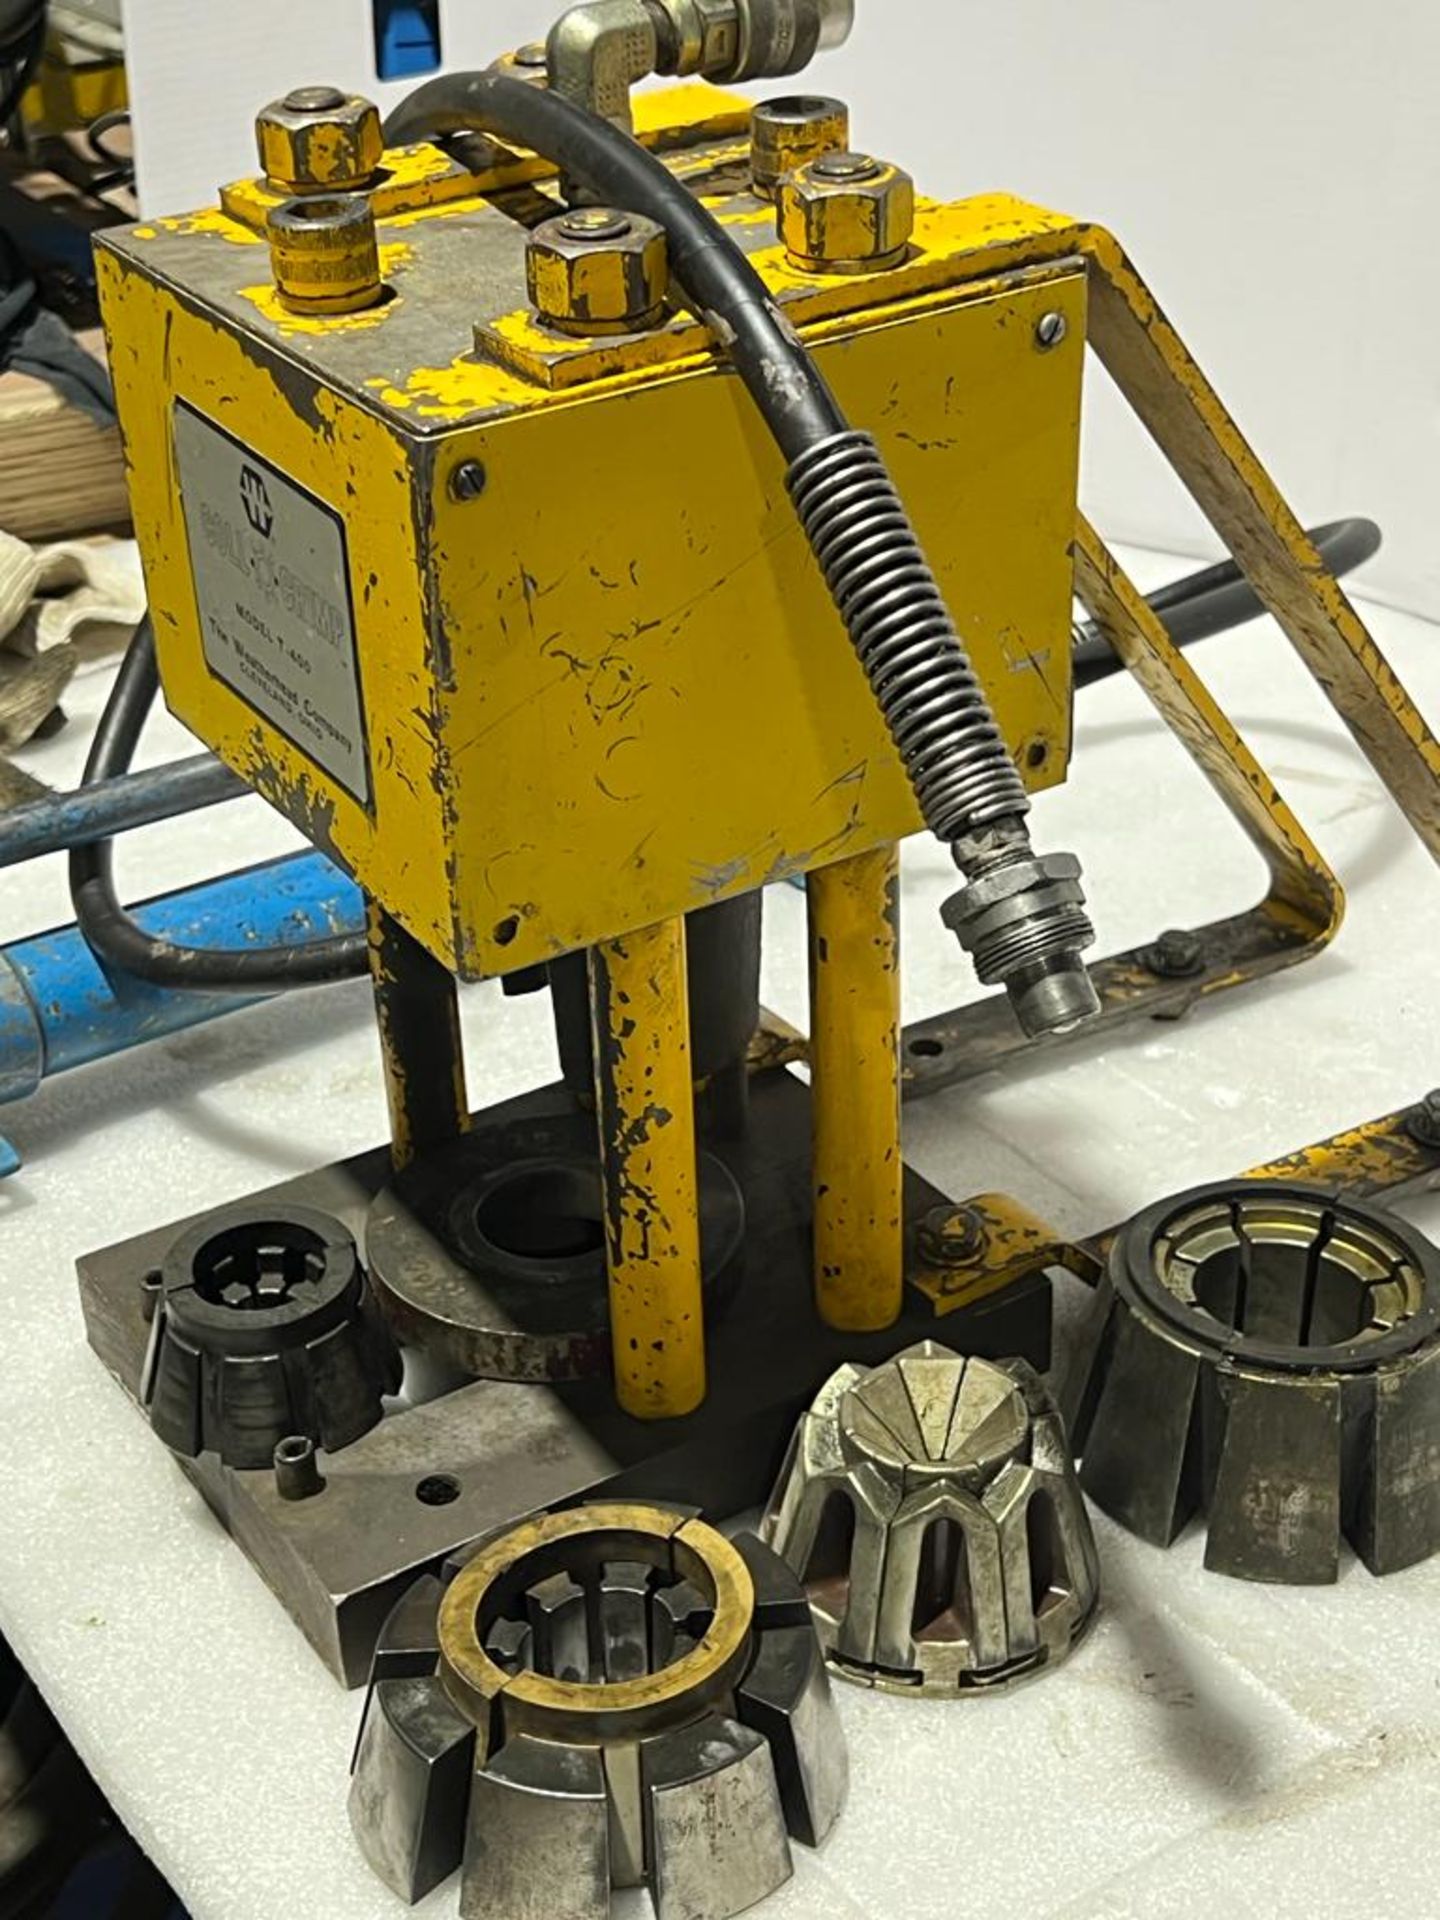 Weatherhead Coll-O-Crimp model T400 Hydraulic Hose Crimper Complete with Hydraulic Hand Pump - Image 2 of 3